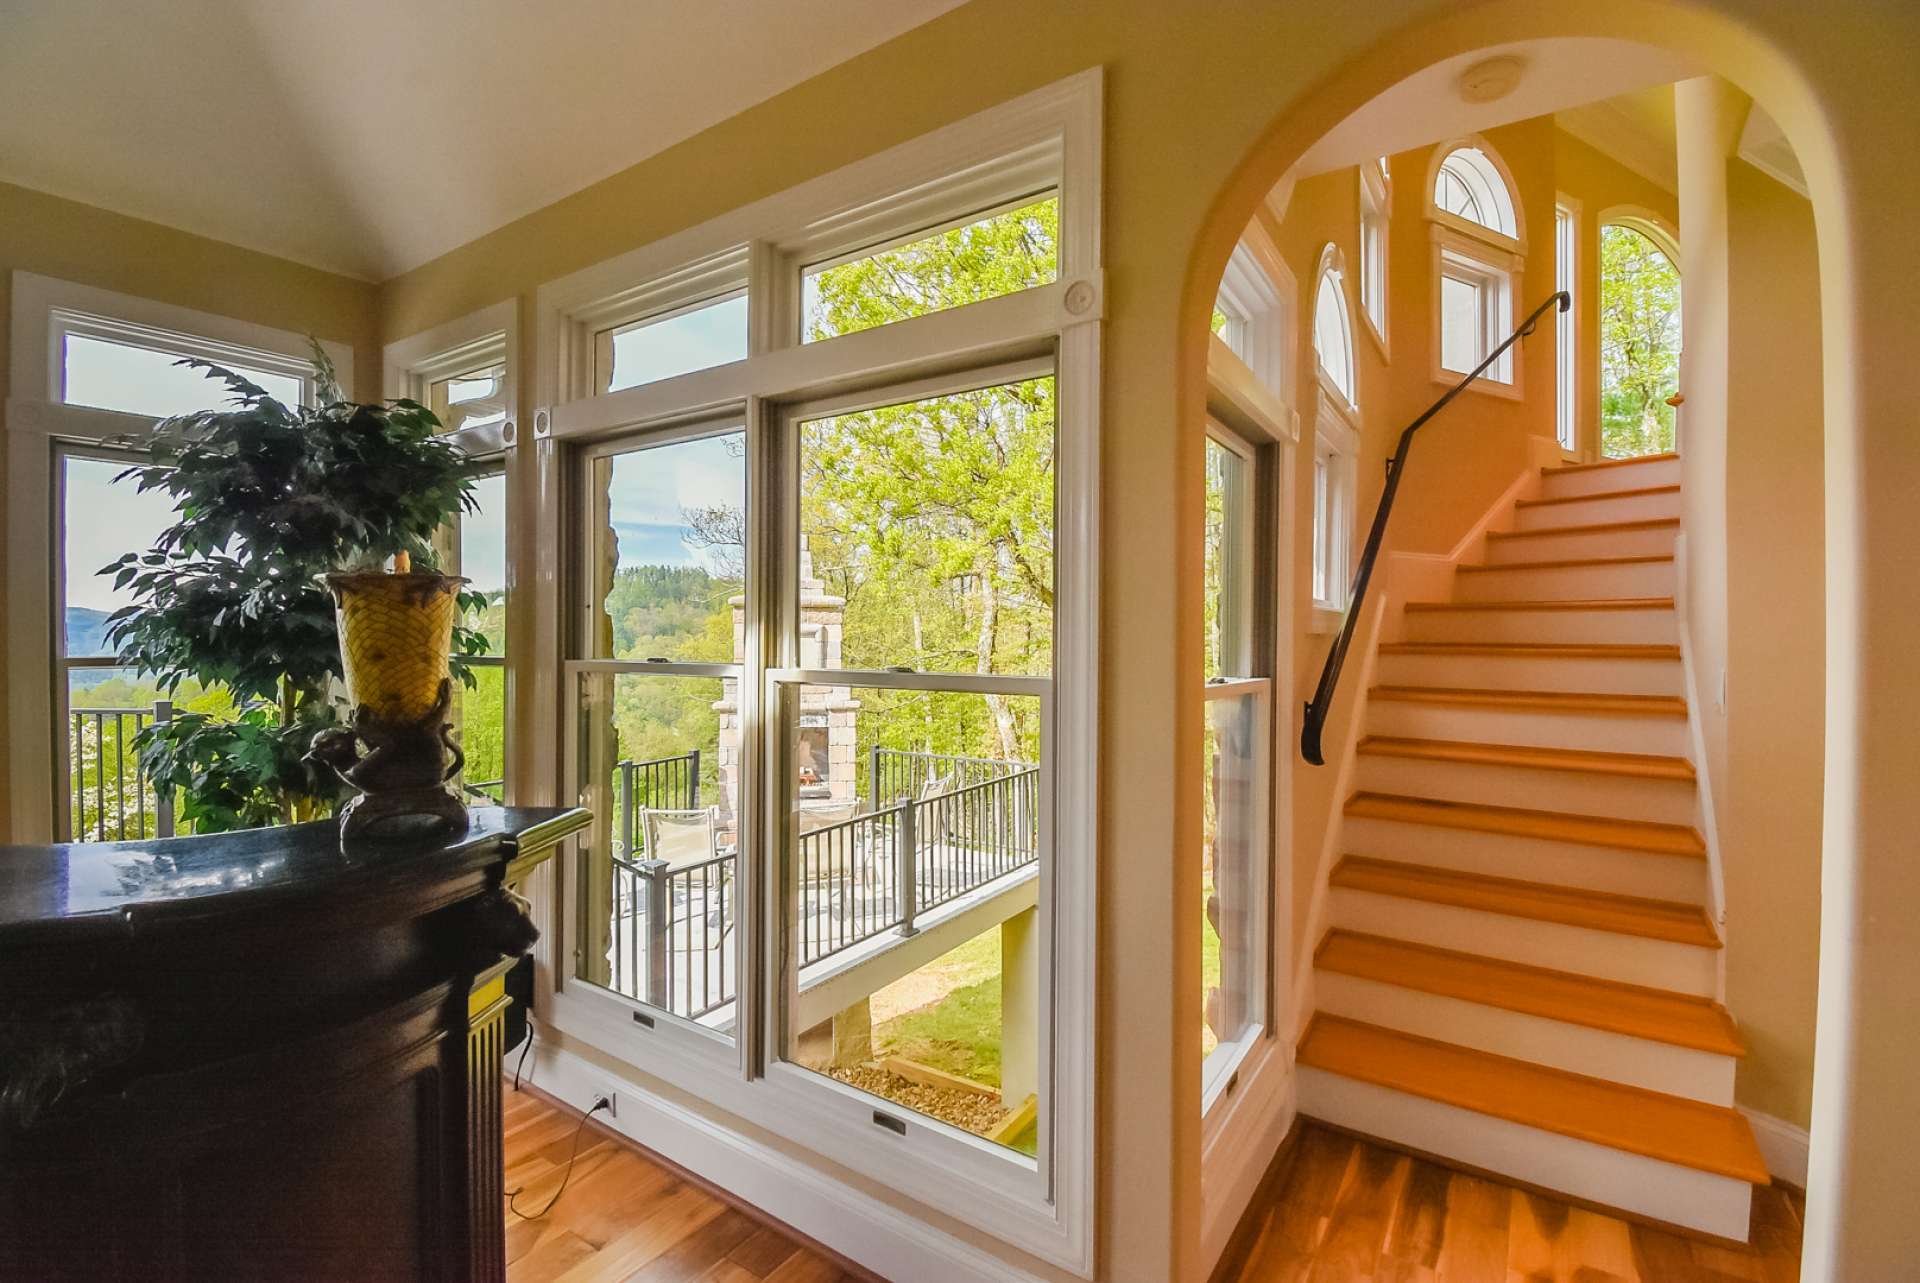 An arched doorway leads to the second level. Notice the use of abundant windows filling the home with natural light and allowing you to enjoy the outdoors from inside.